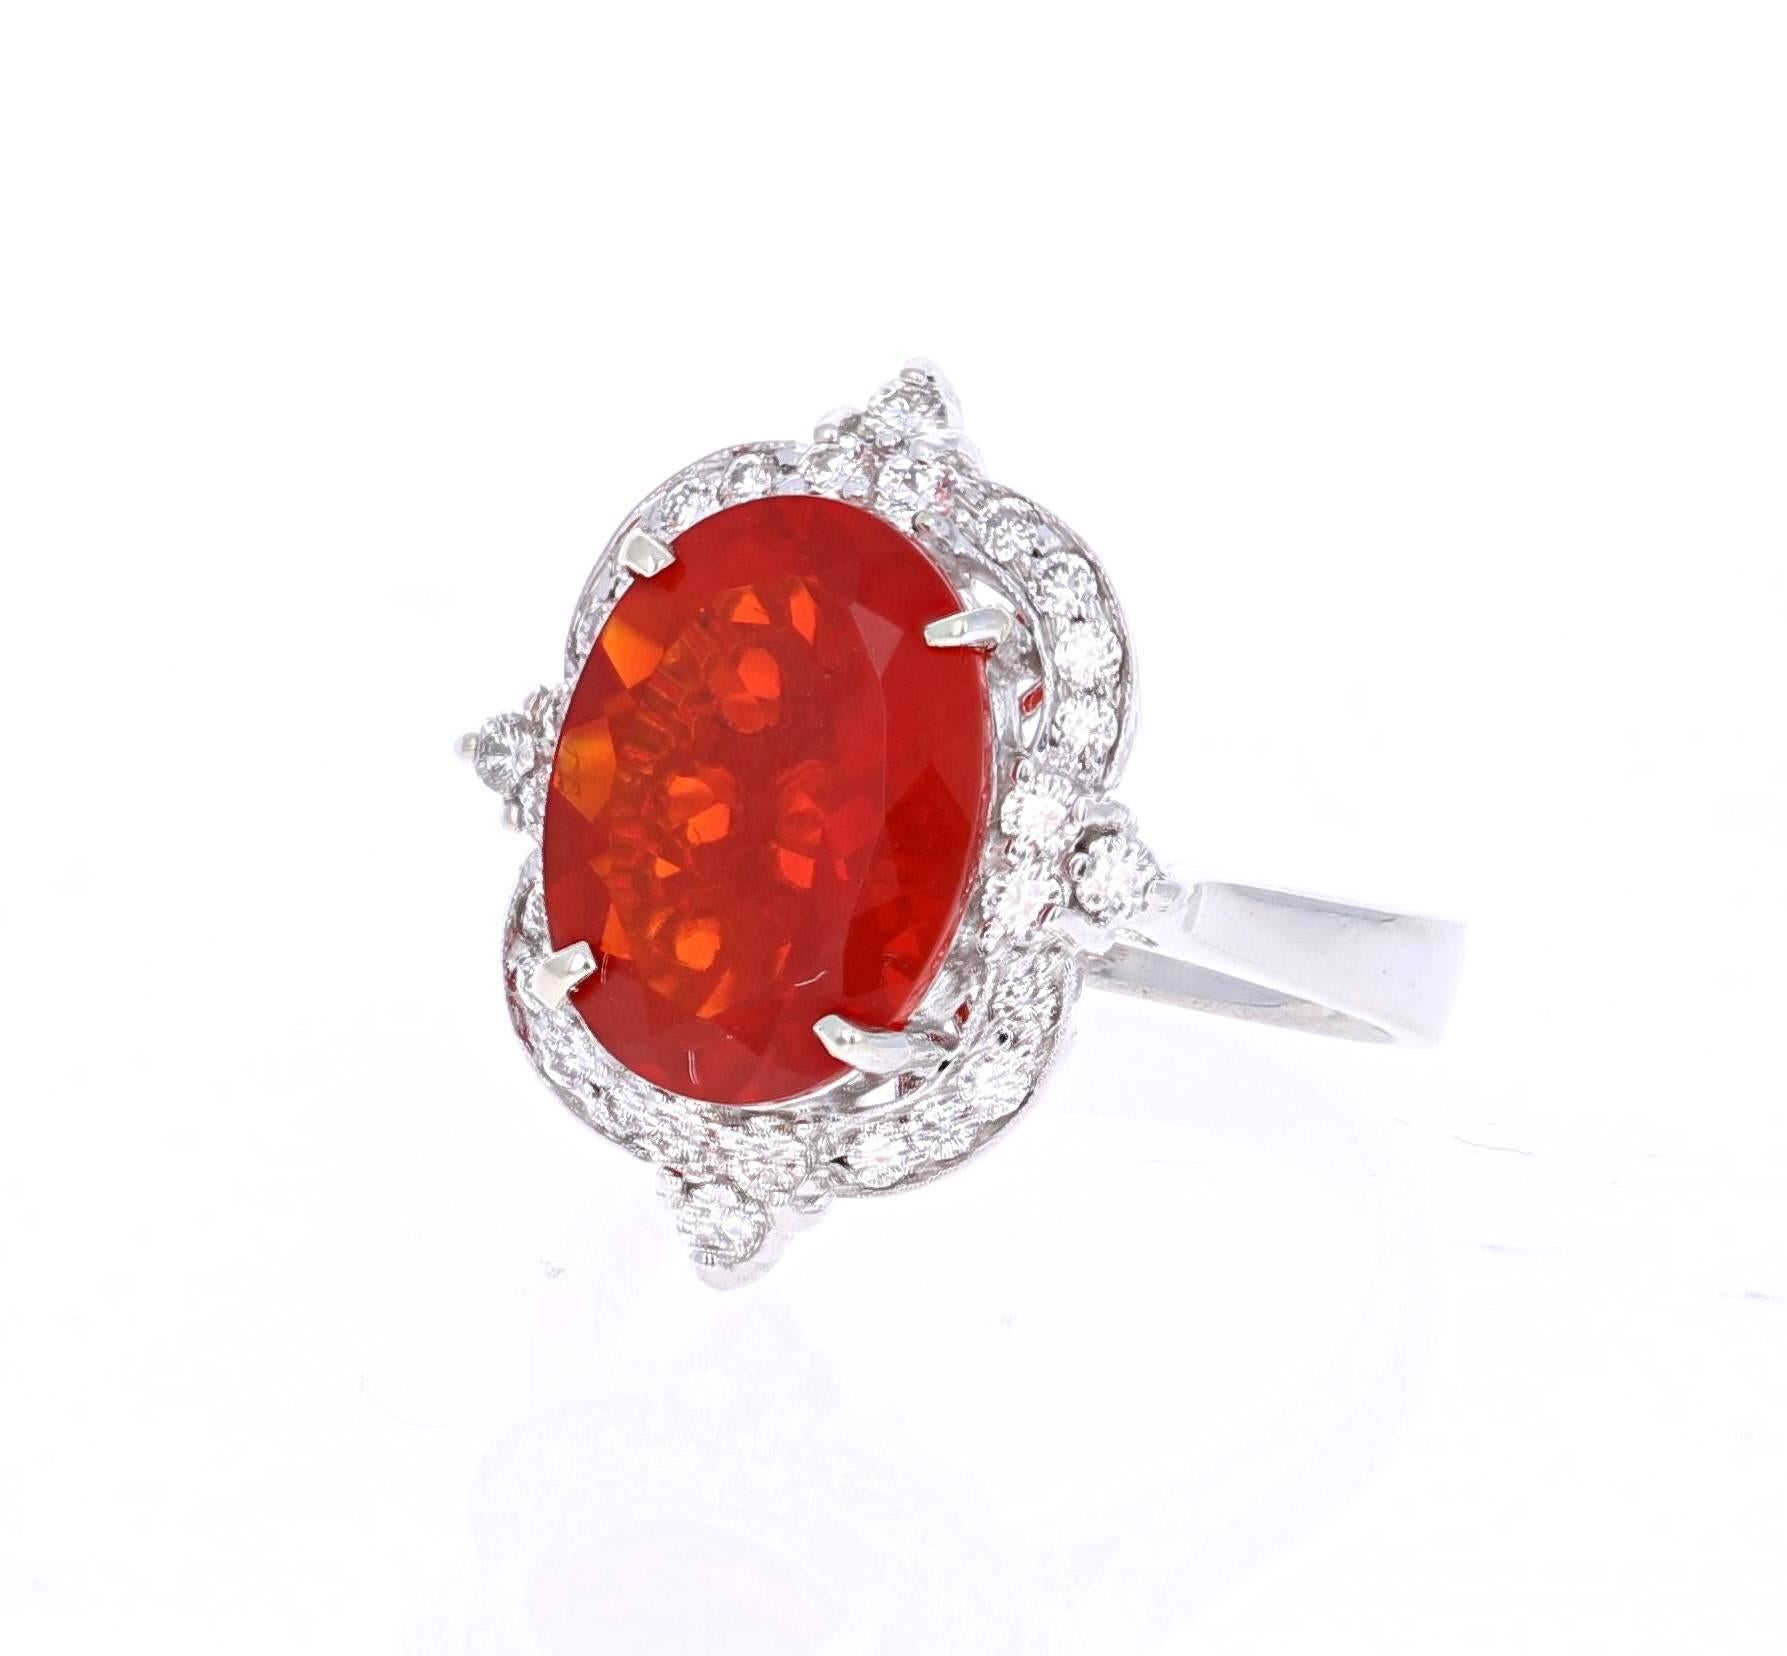 This gorgeous cocktail ring has a beautiful Red Oval Cut Fire Opal that weighs 4.31 carats and 28 Round Cut Diamonds that weigh 0.53 carats. The clarity and color of the diamonds are VS2-H.  The total carat weight of the ring is 4.84 carats. 

It is